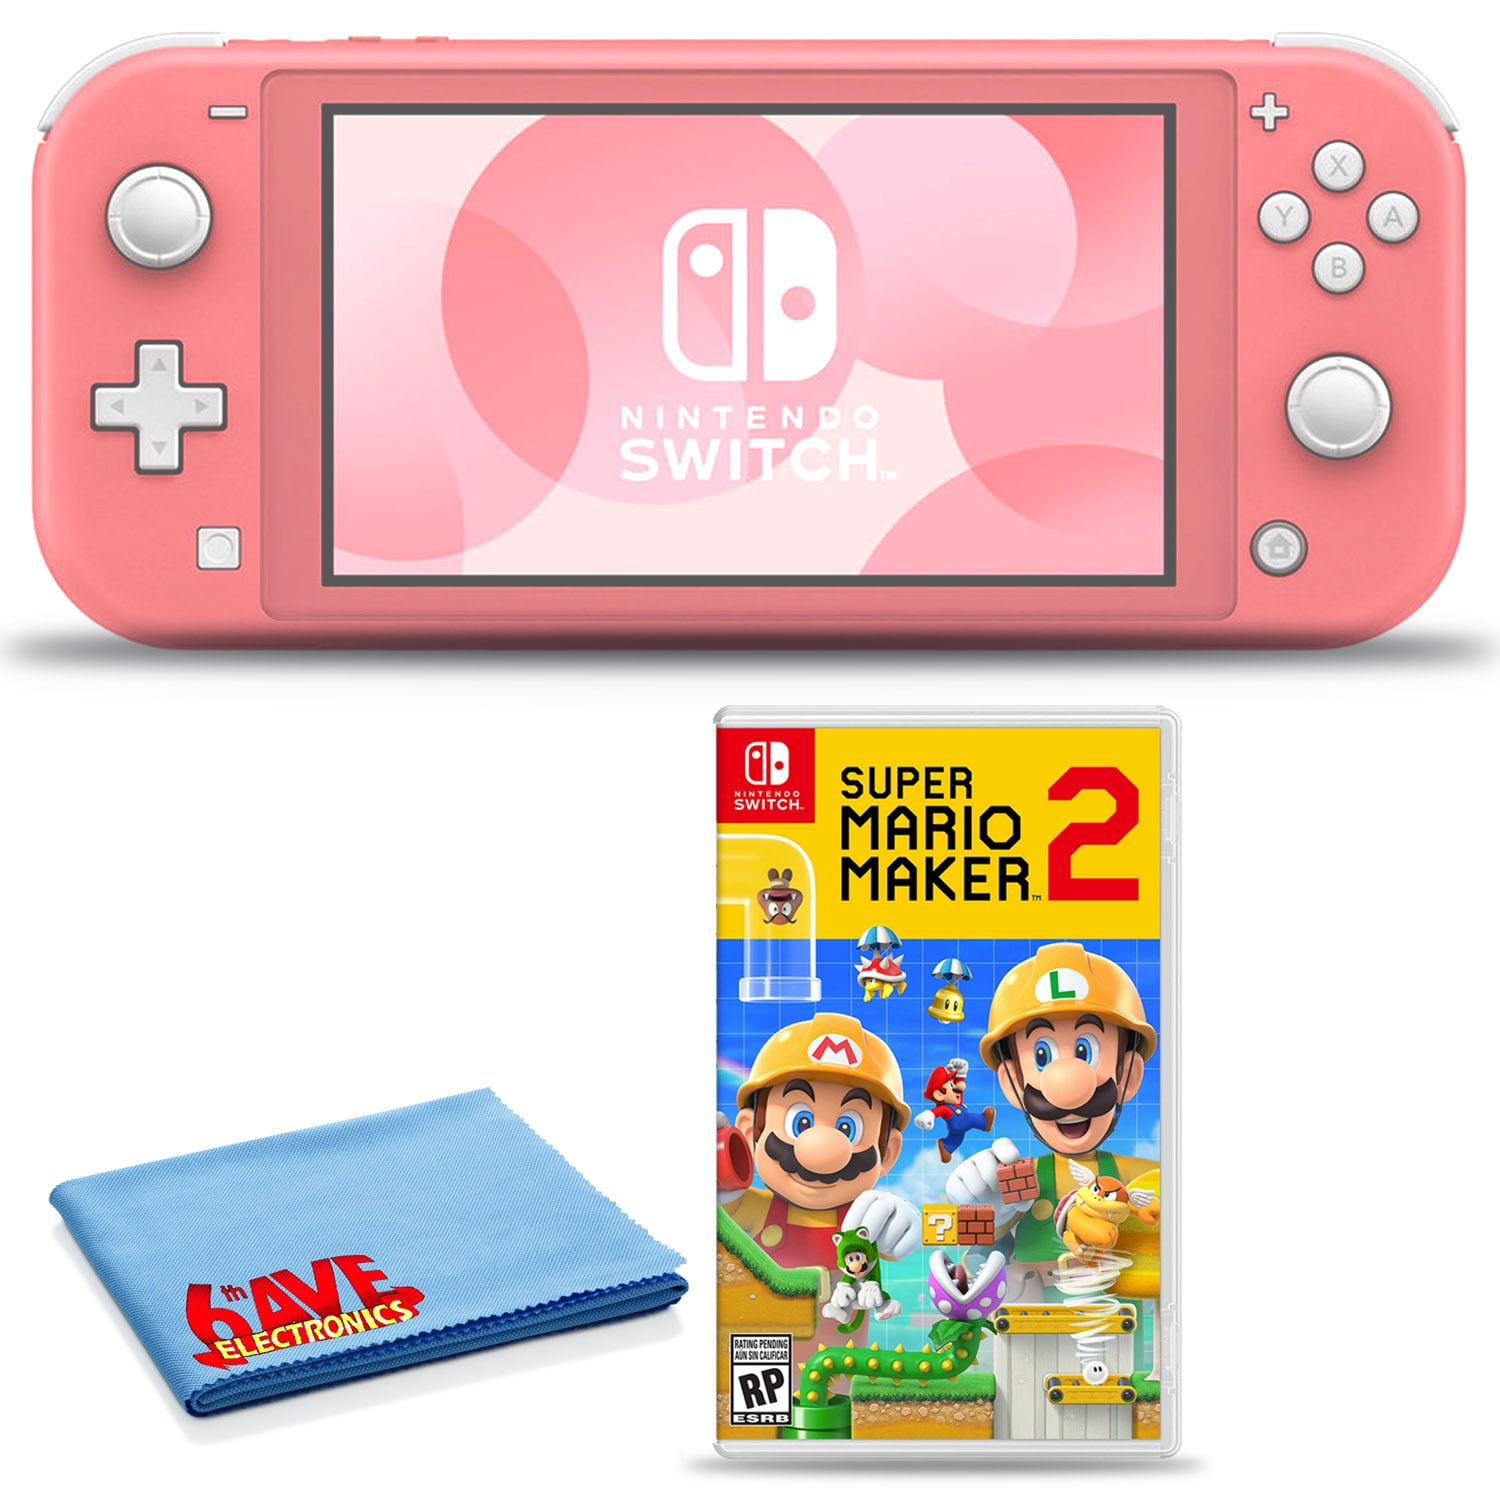 Nintendo Switch Lite (Turquoise) Bundle with 6Ave Cleaning Cloth +